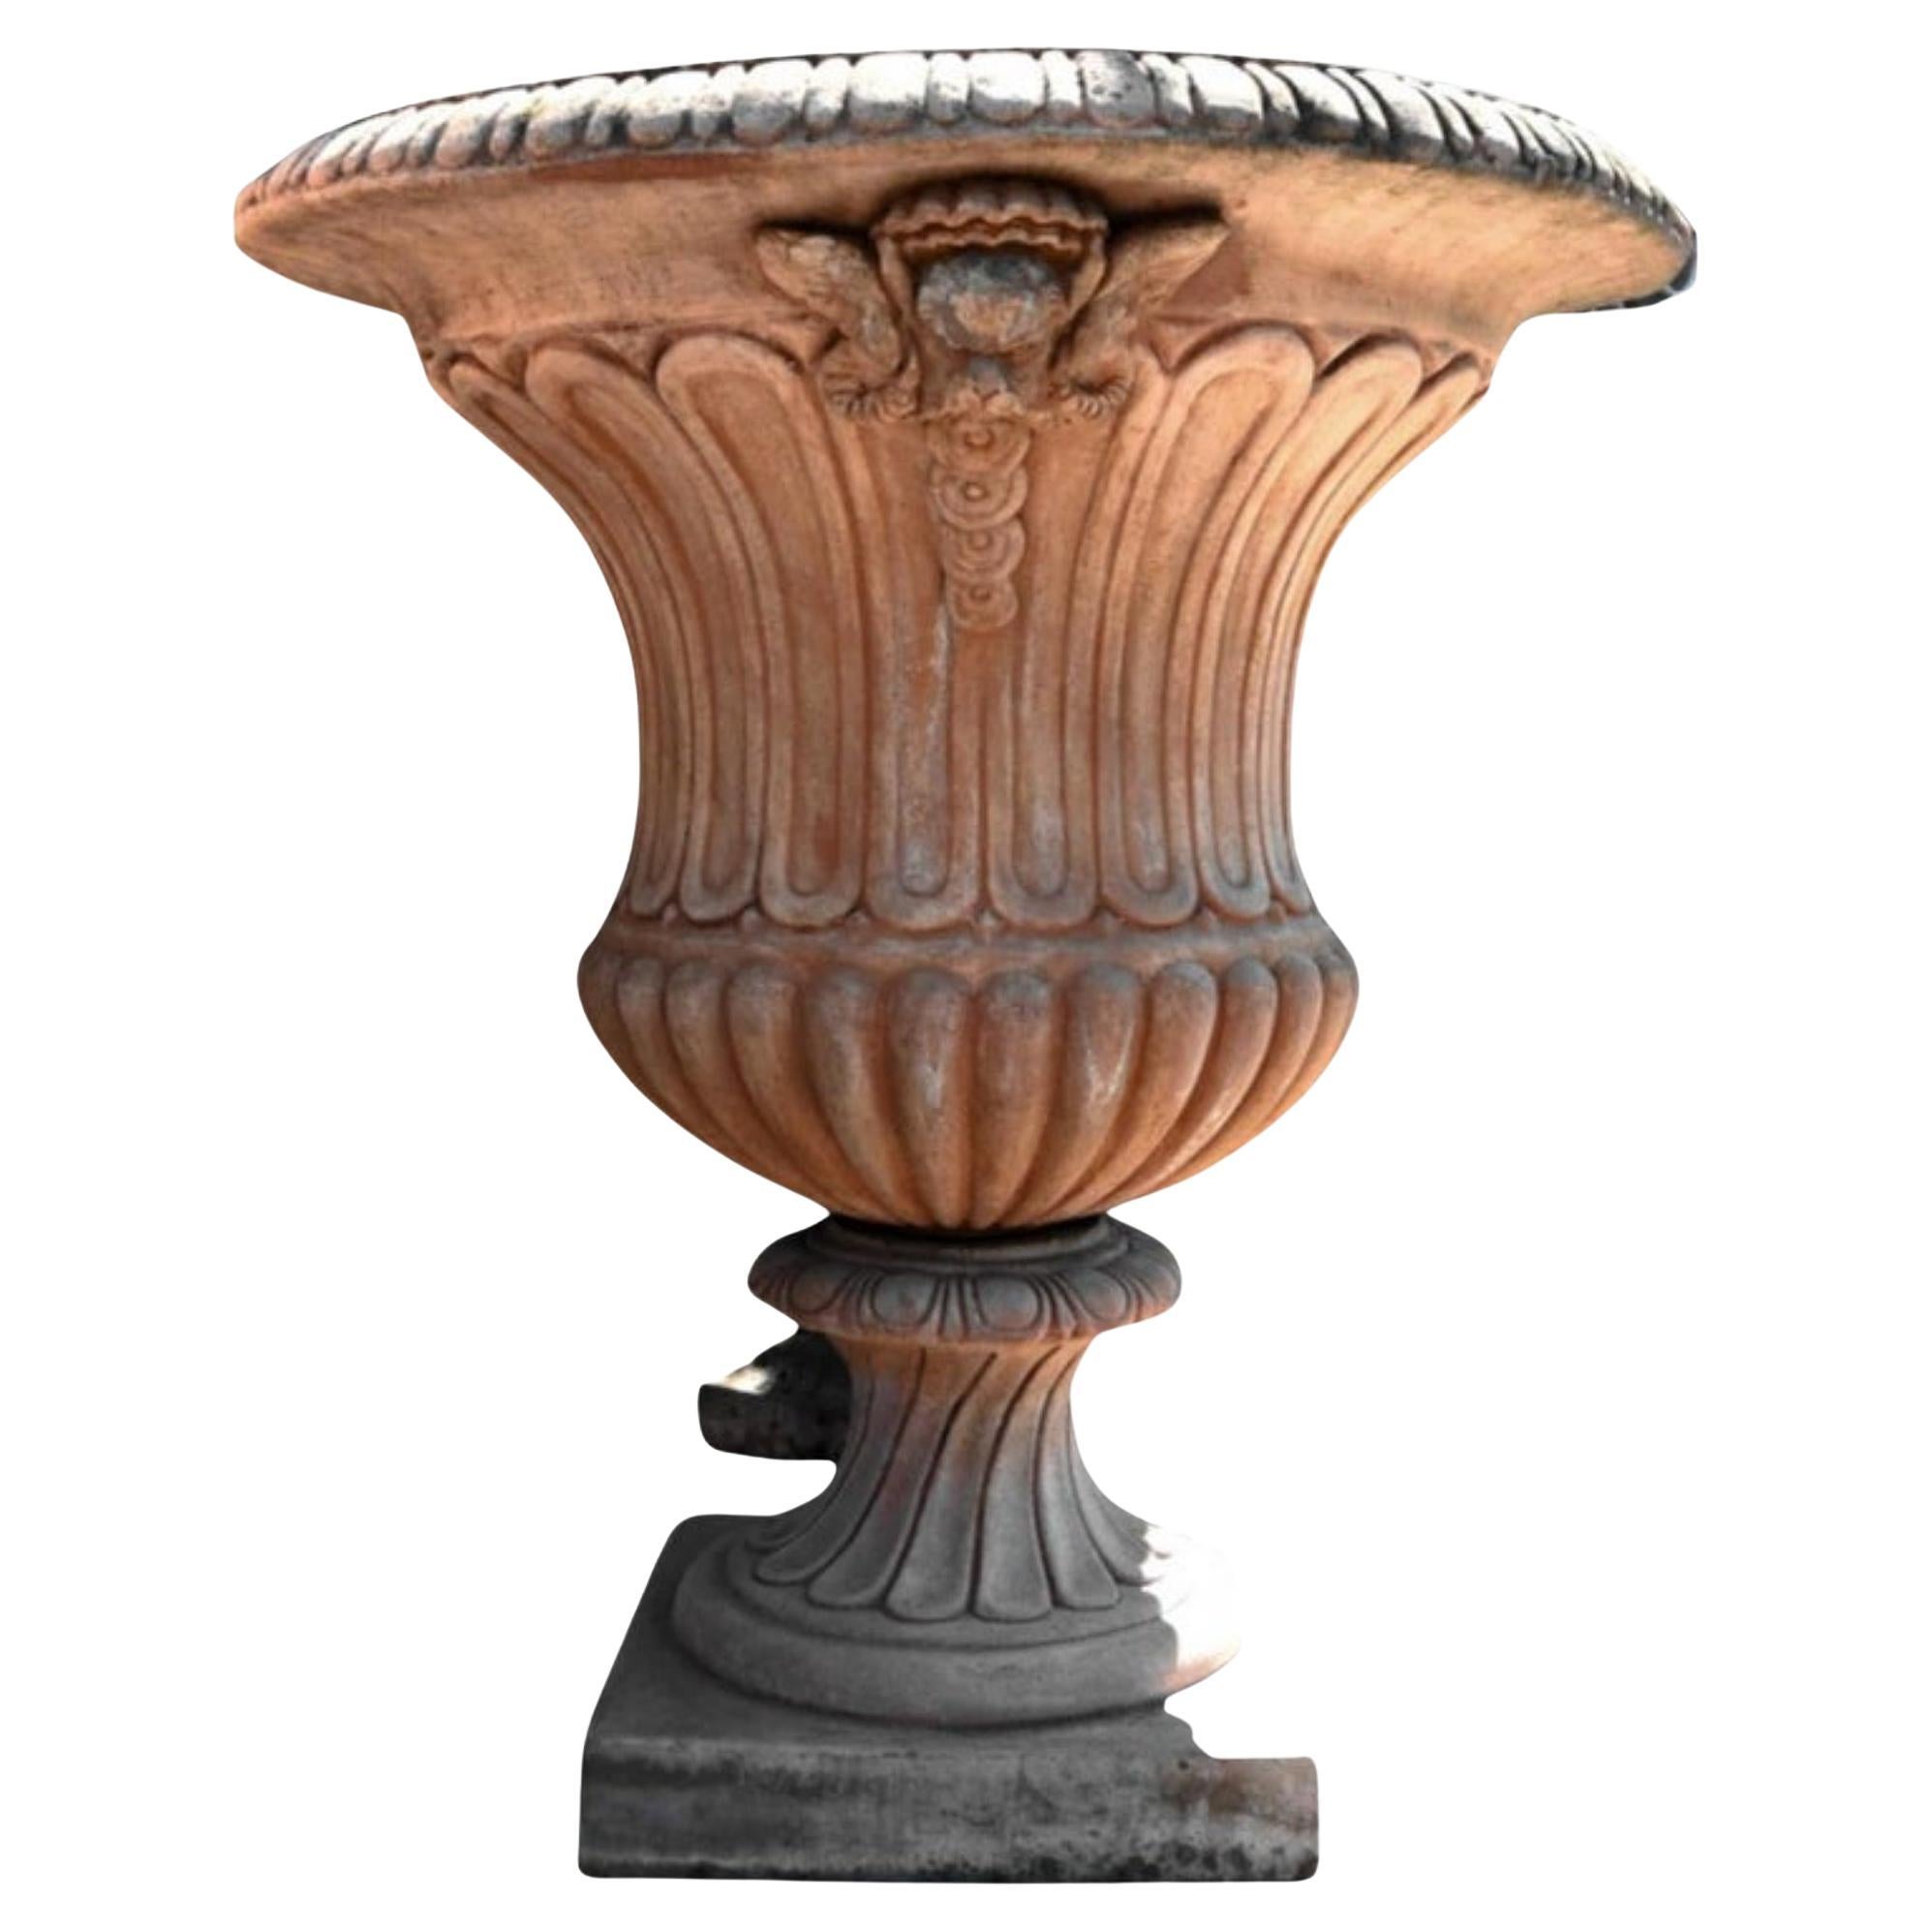 Large Mediceo Vase Baccellato Terracotta Goblet, Early 20th Century